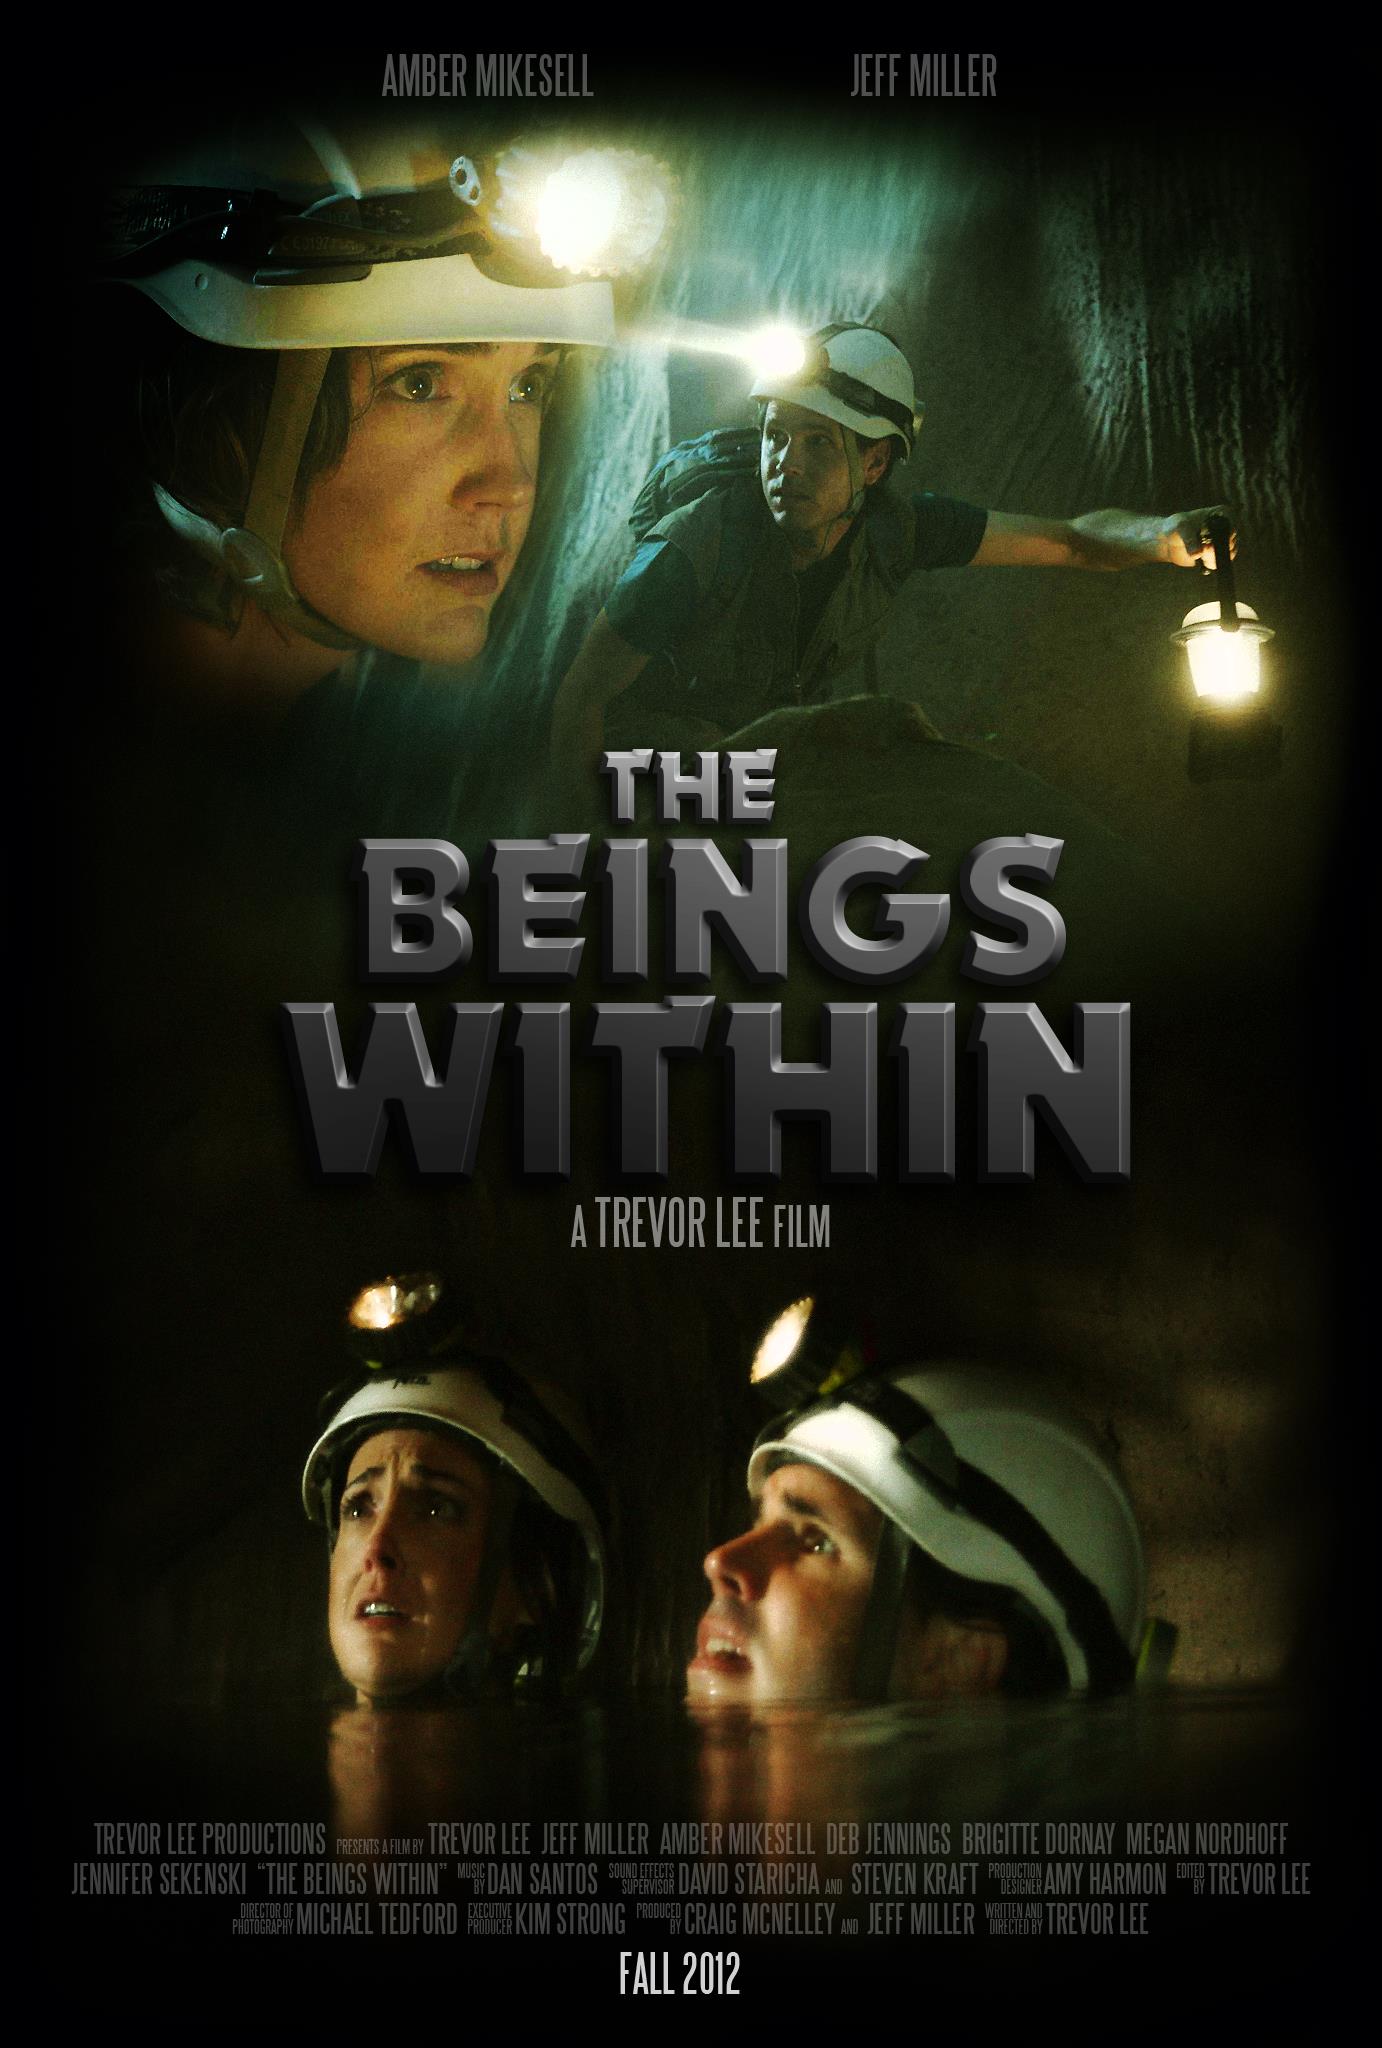 Poster for 'The Beings Within' A Trevor Lee Film